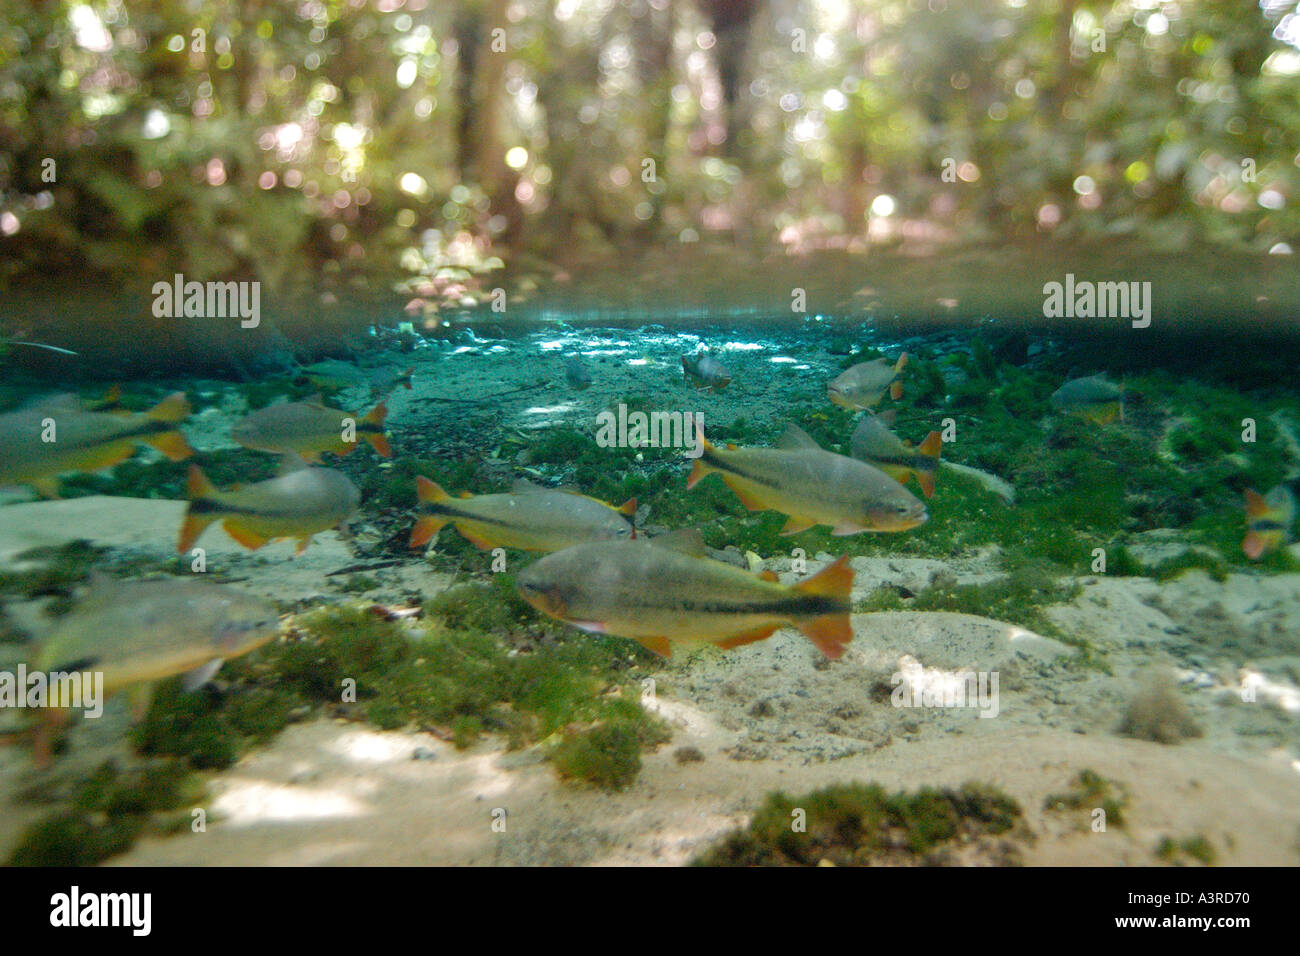 Piraputangas Brycon hilarii in creek and river side trees in national freshwater spring preserve Aquário natural Bonito Brazil Stock Photo